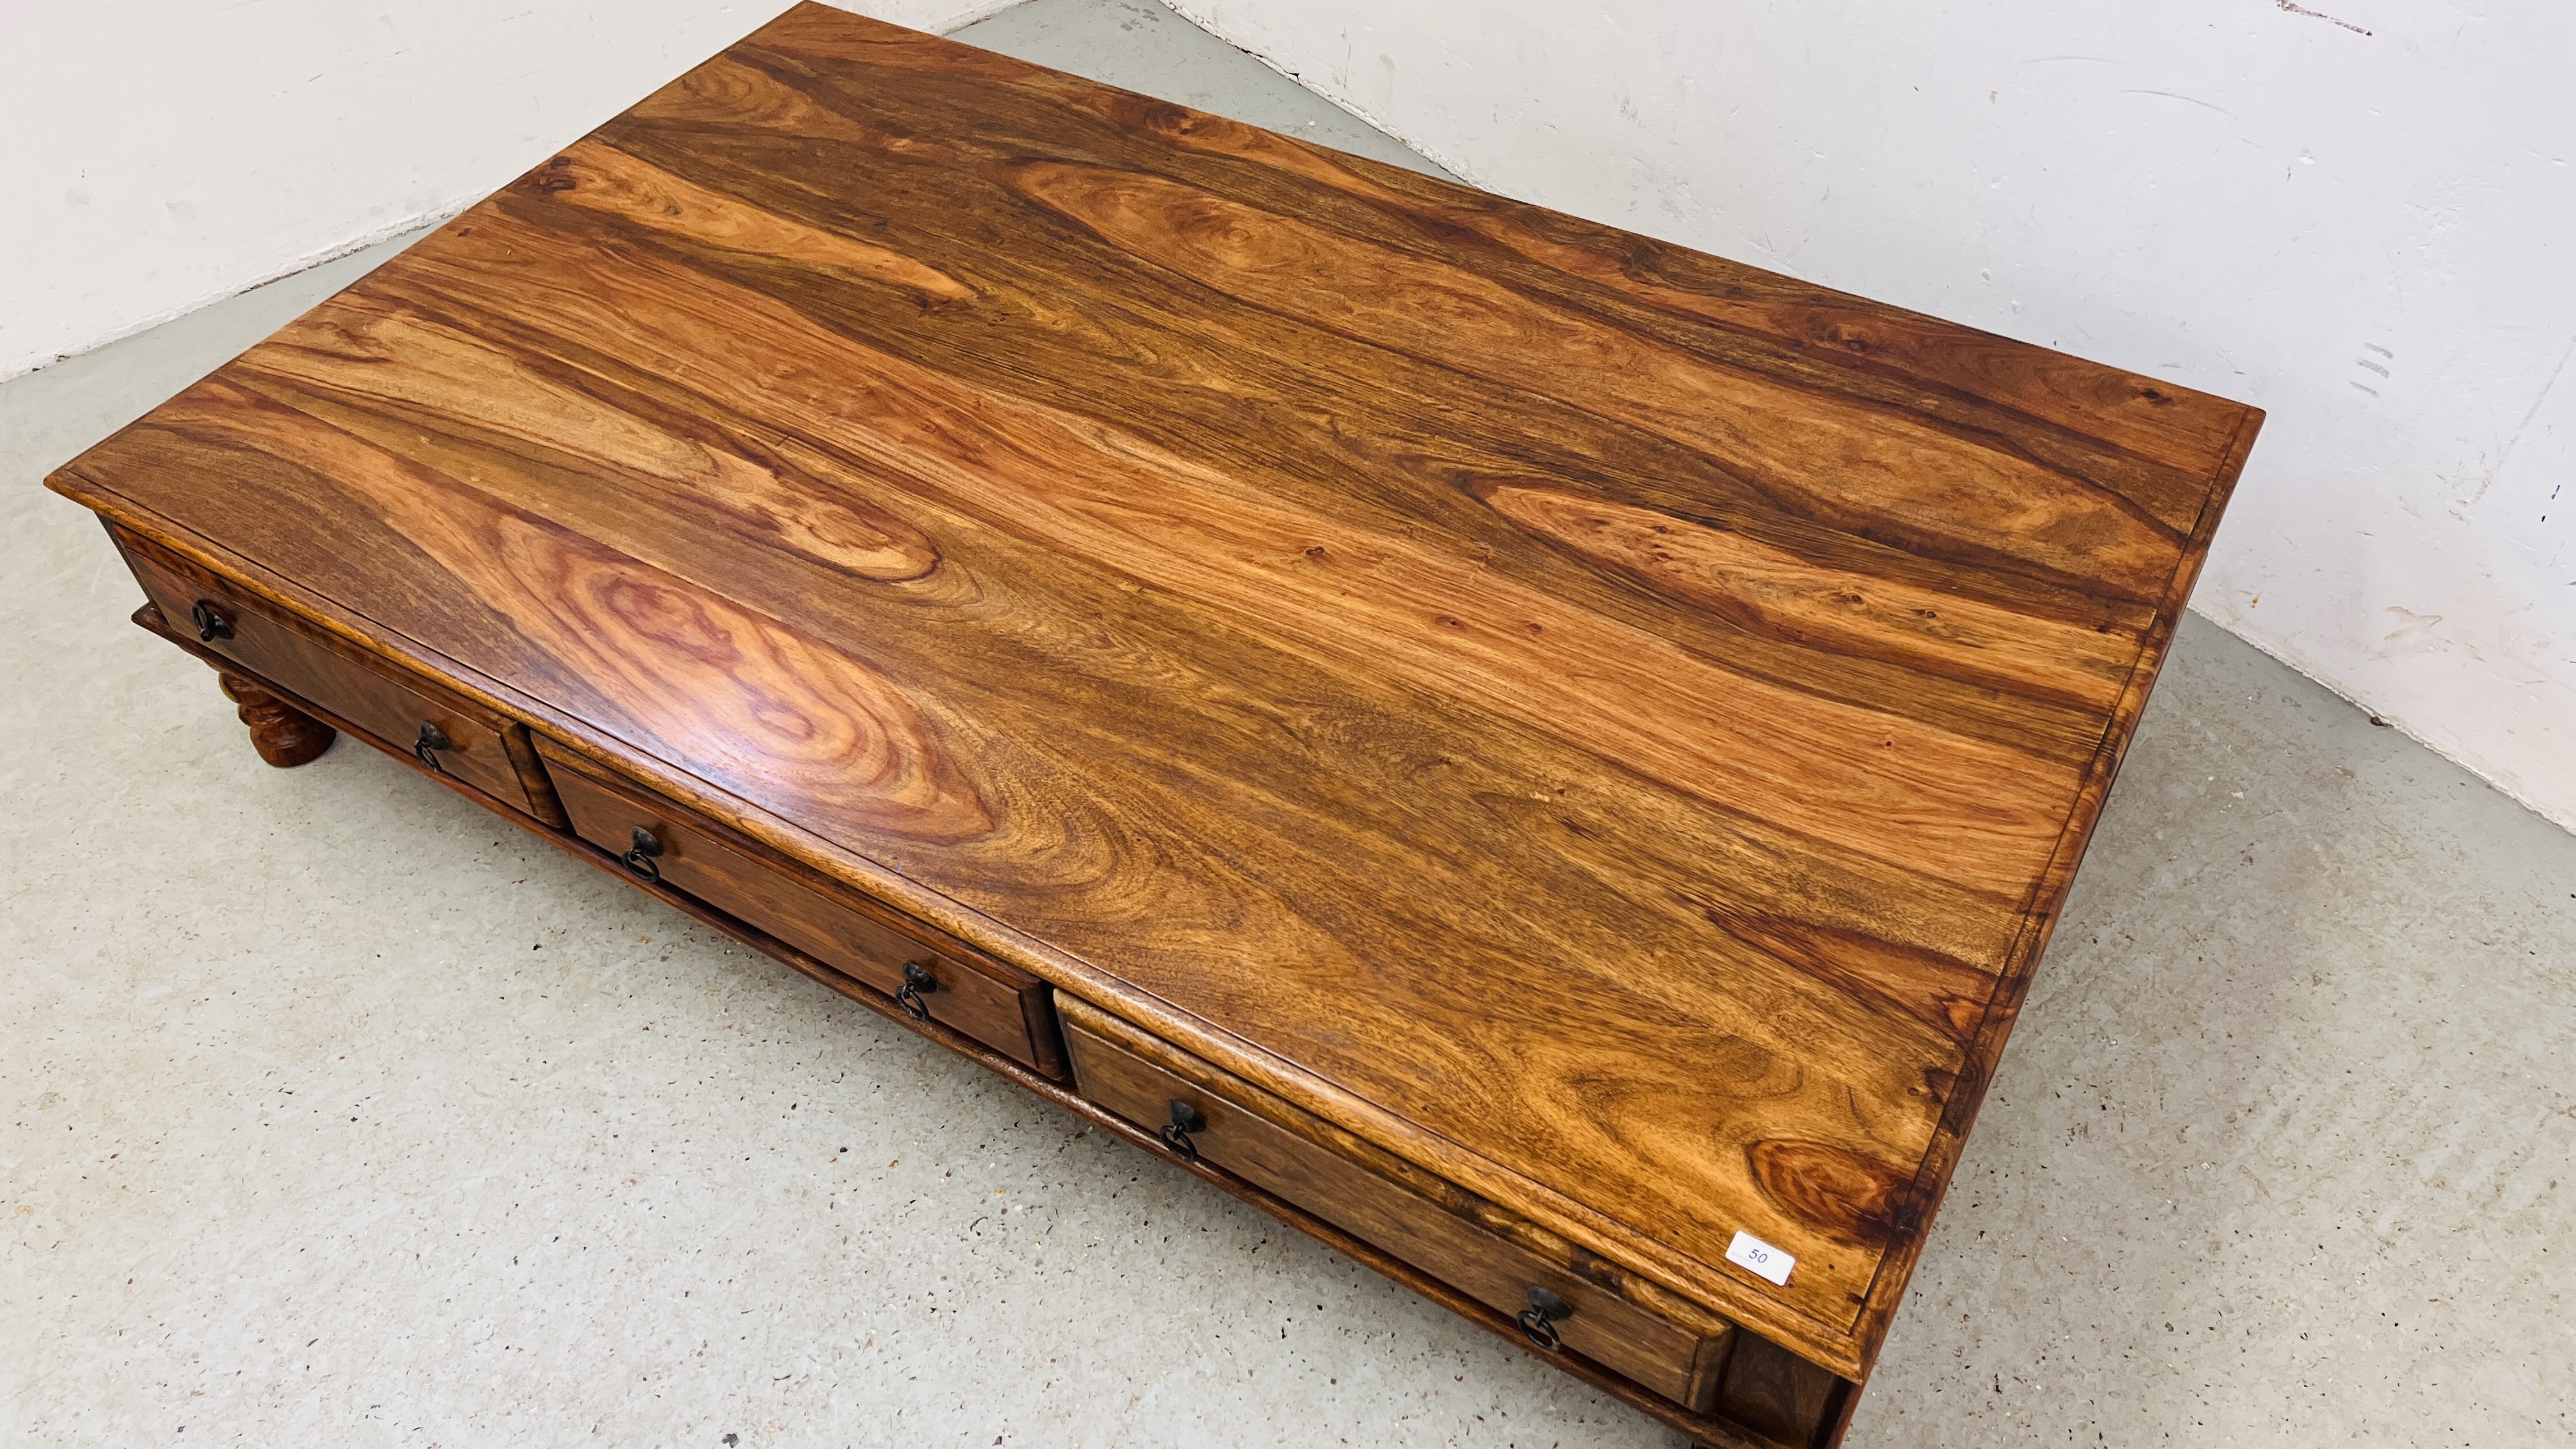 A MODERN ORIENTAL HARDWOOD COFFEE TABLE WITH FRIEZE DRAWERS 181CM. LONG. - Image 2 of 15